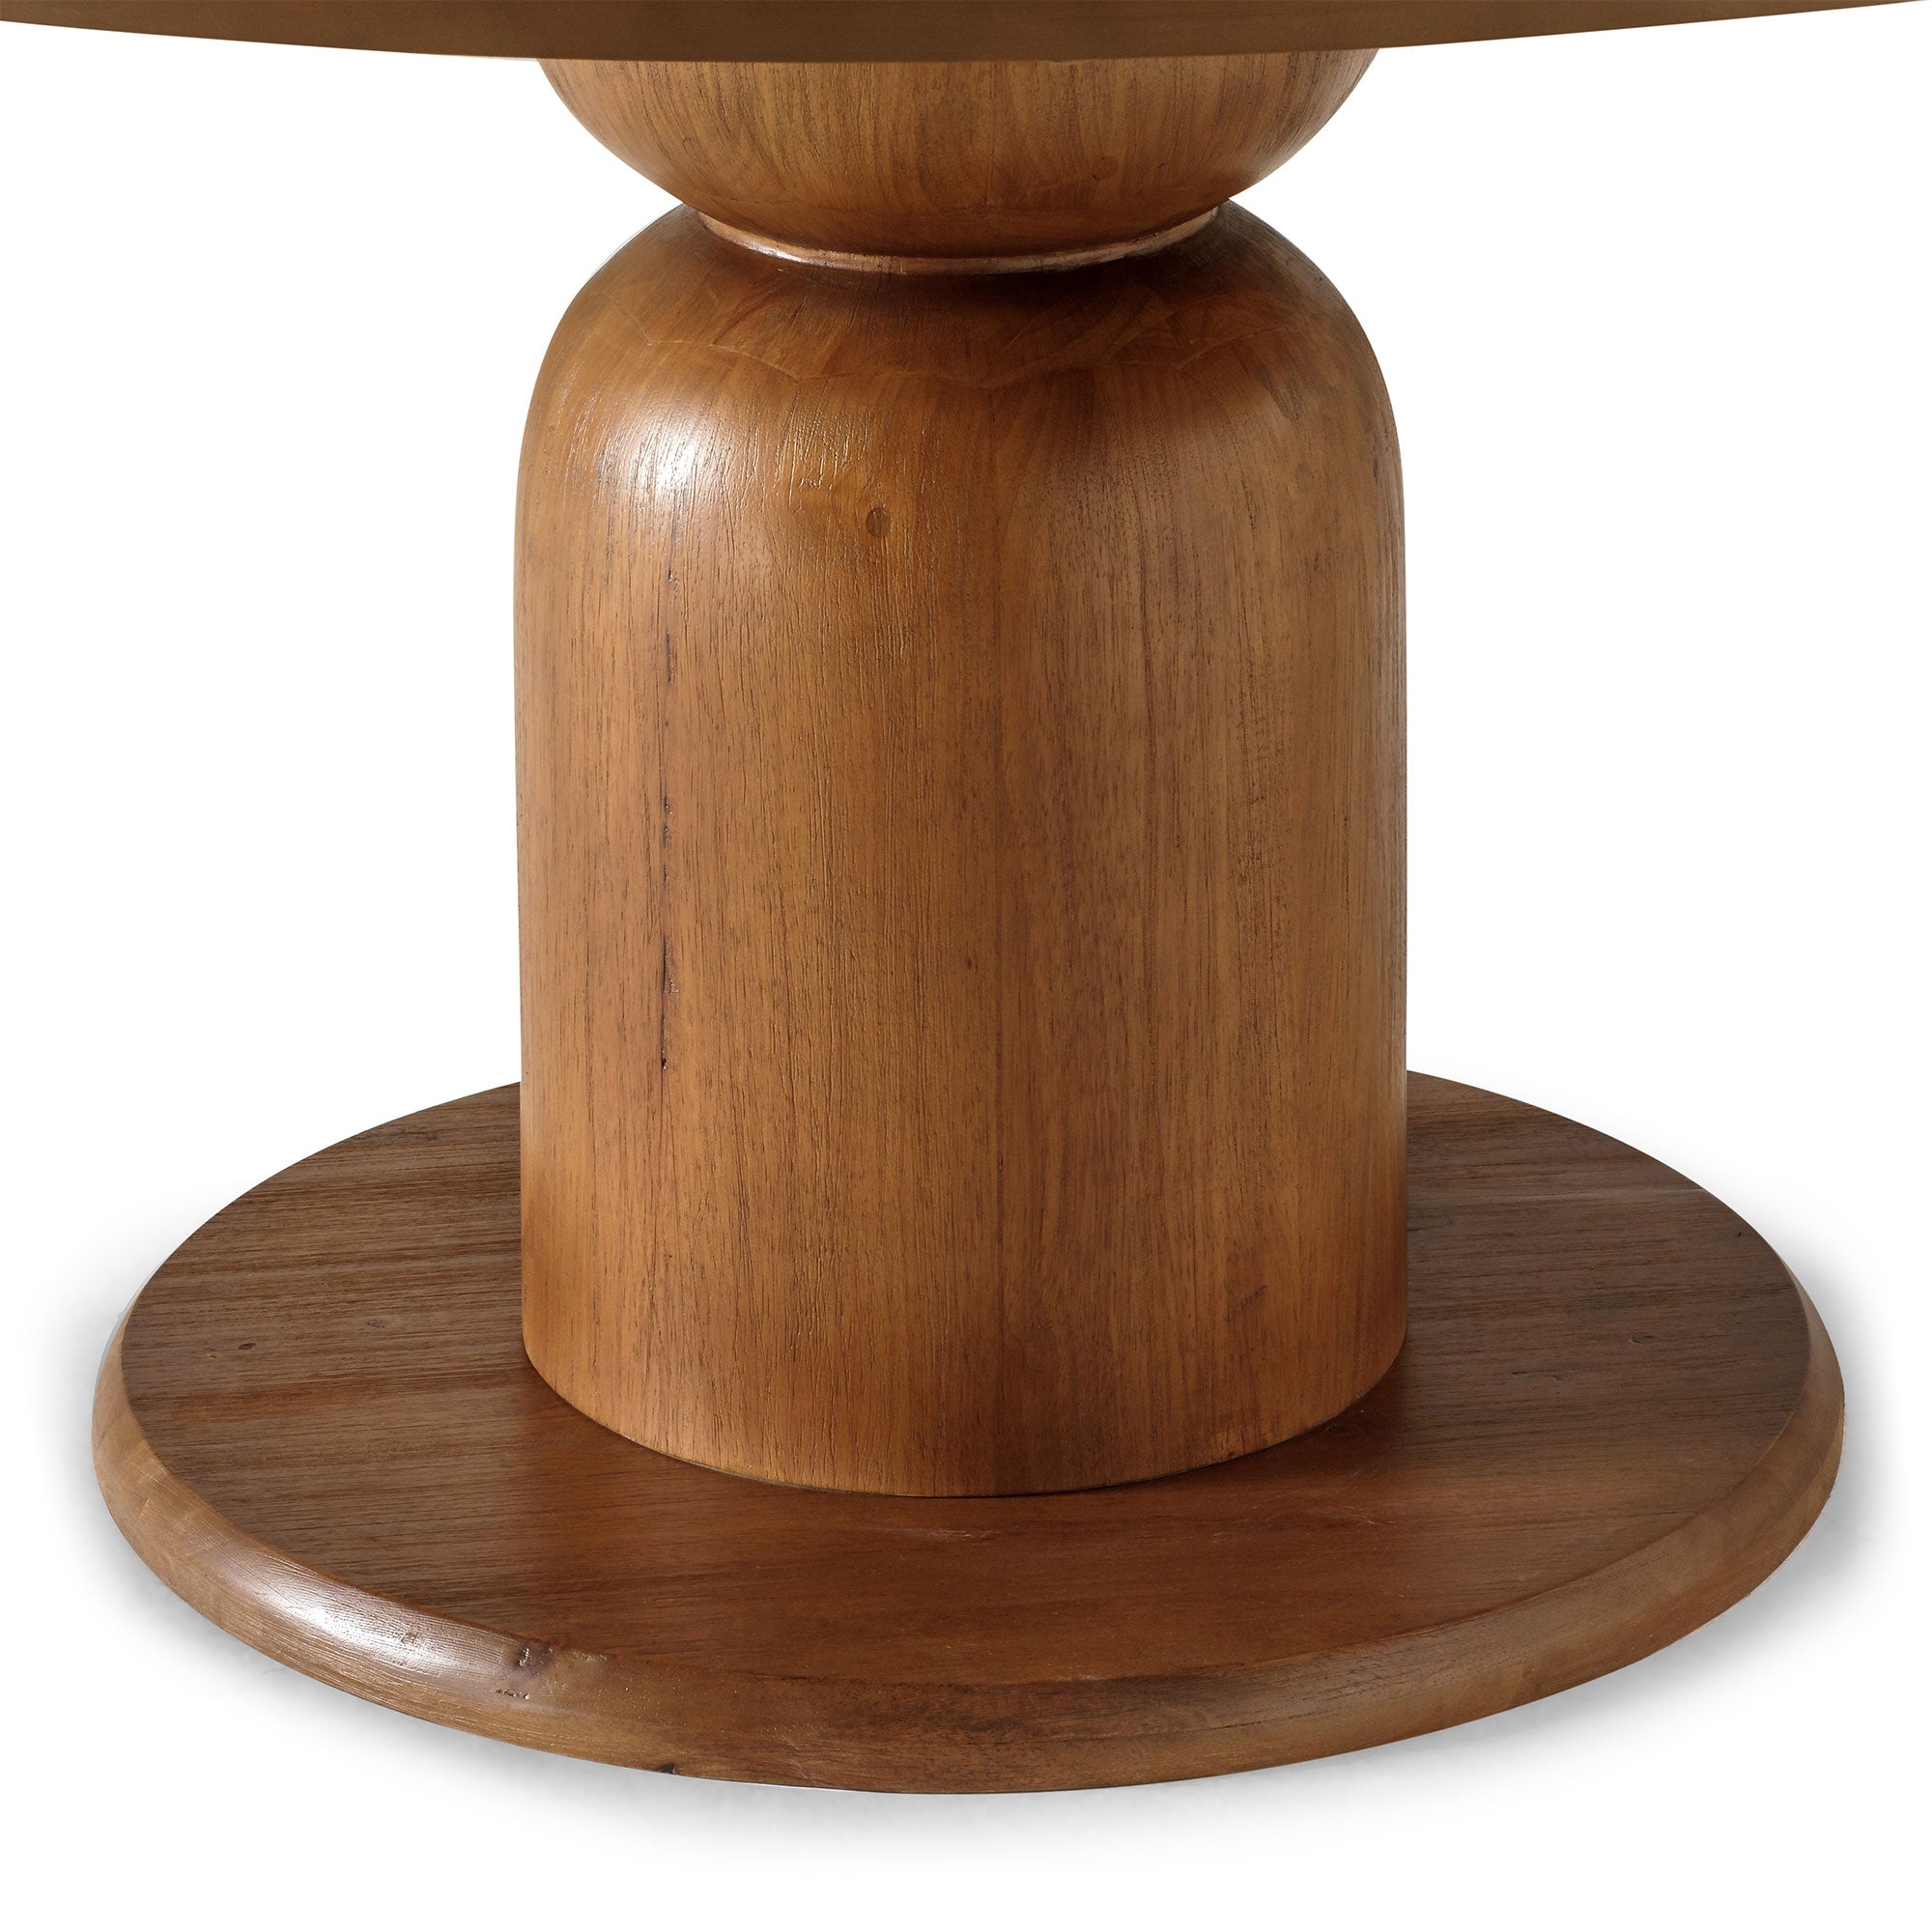 Mila Contemporary Round Wooden Dining Table in Refined Brown Finish in Dining Furniture by Maven Lane